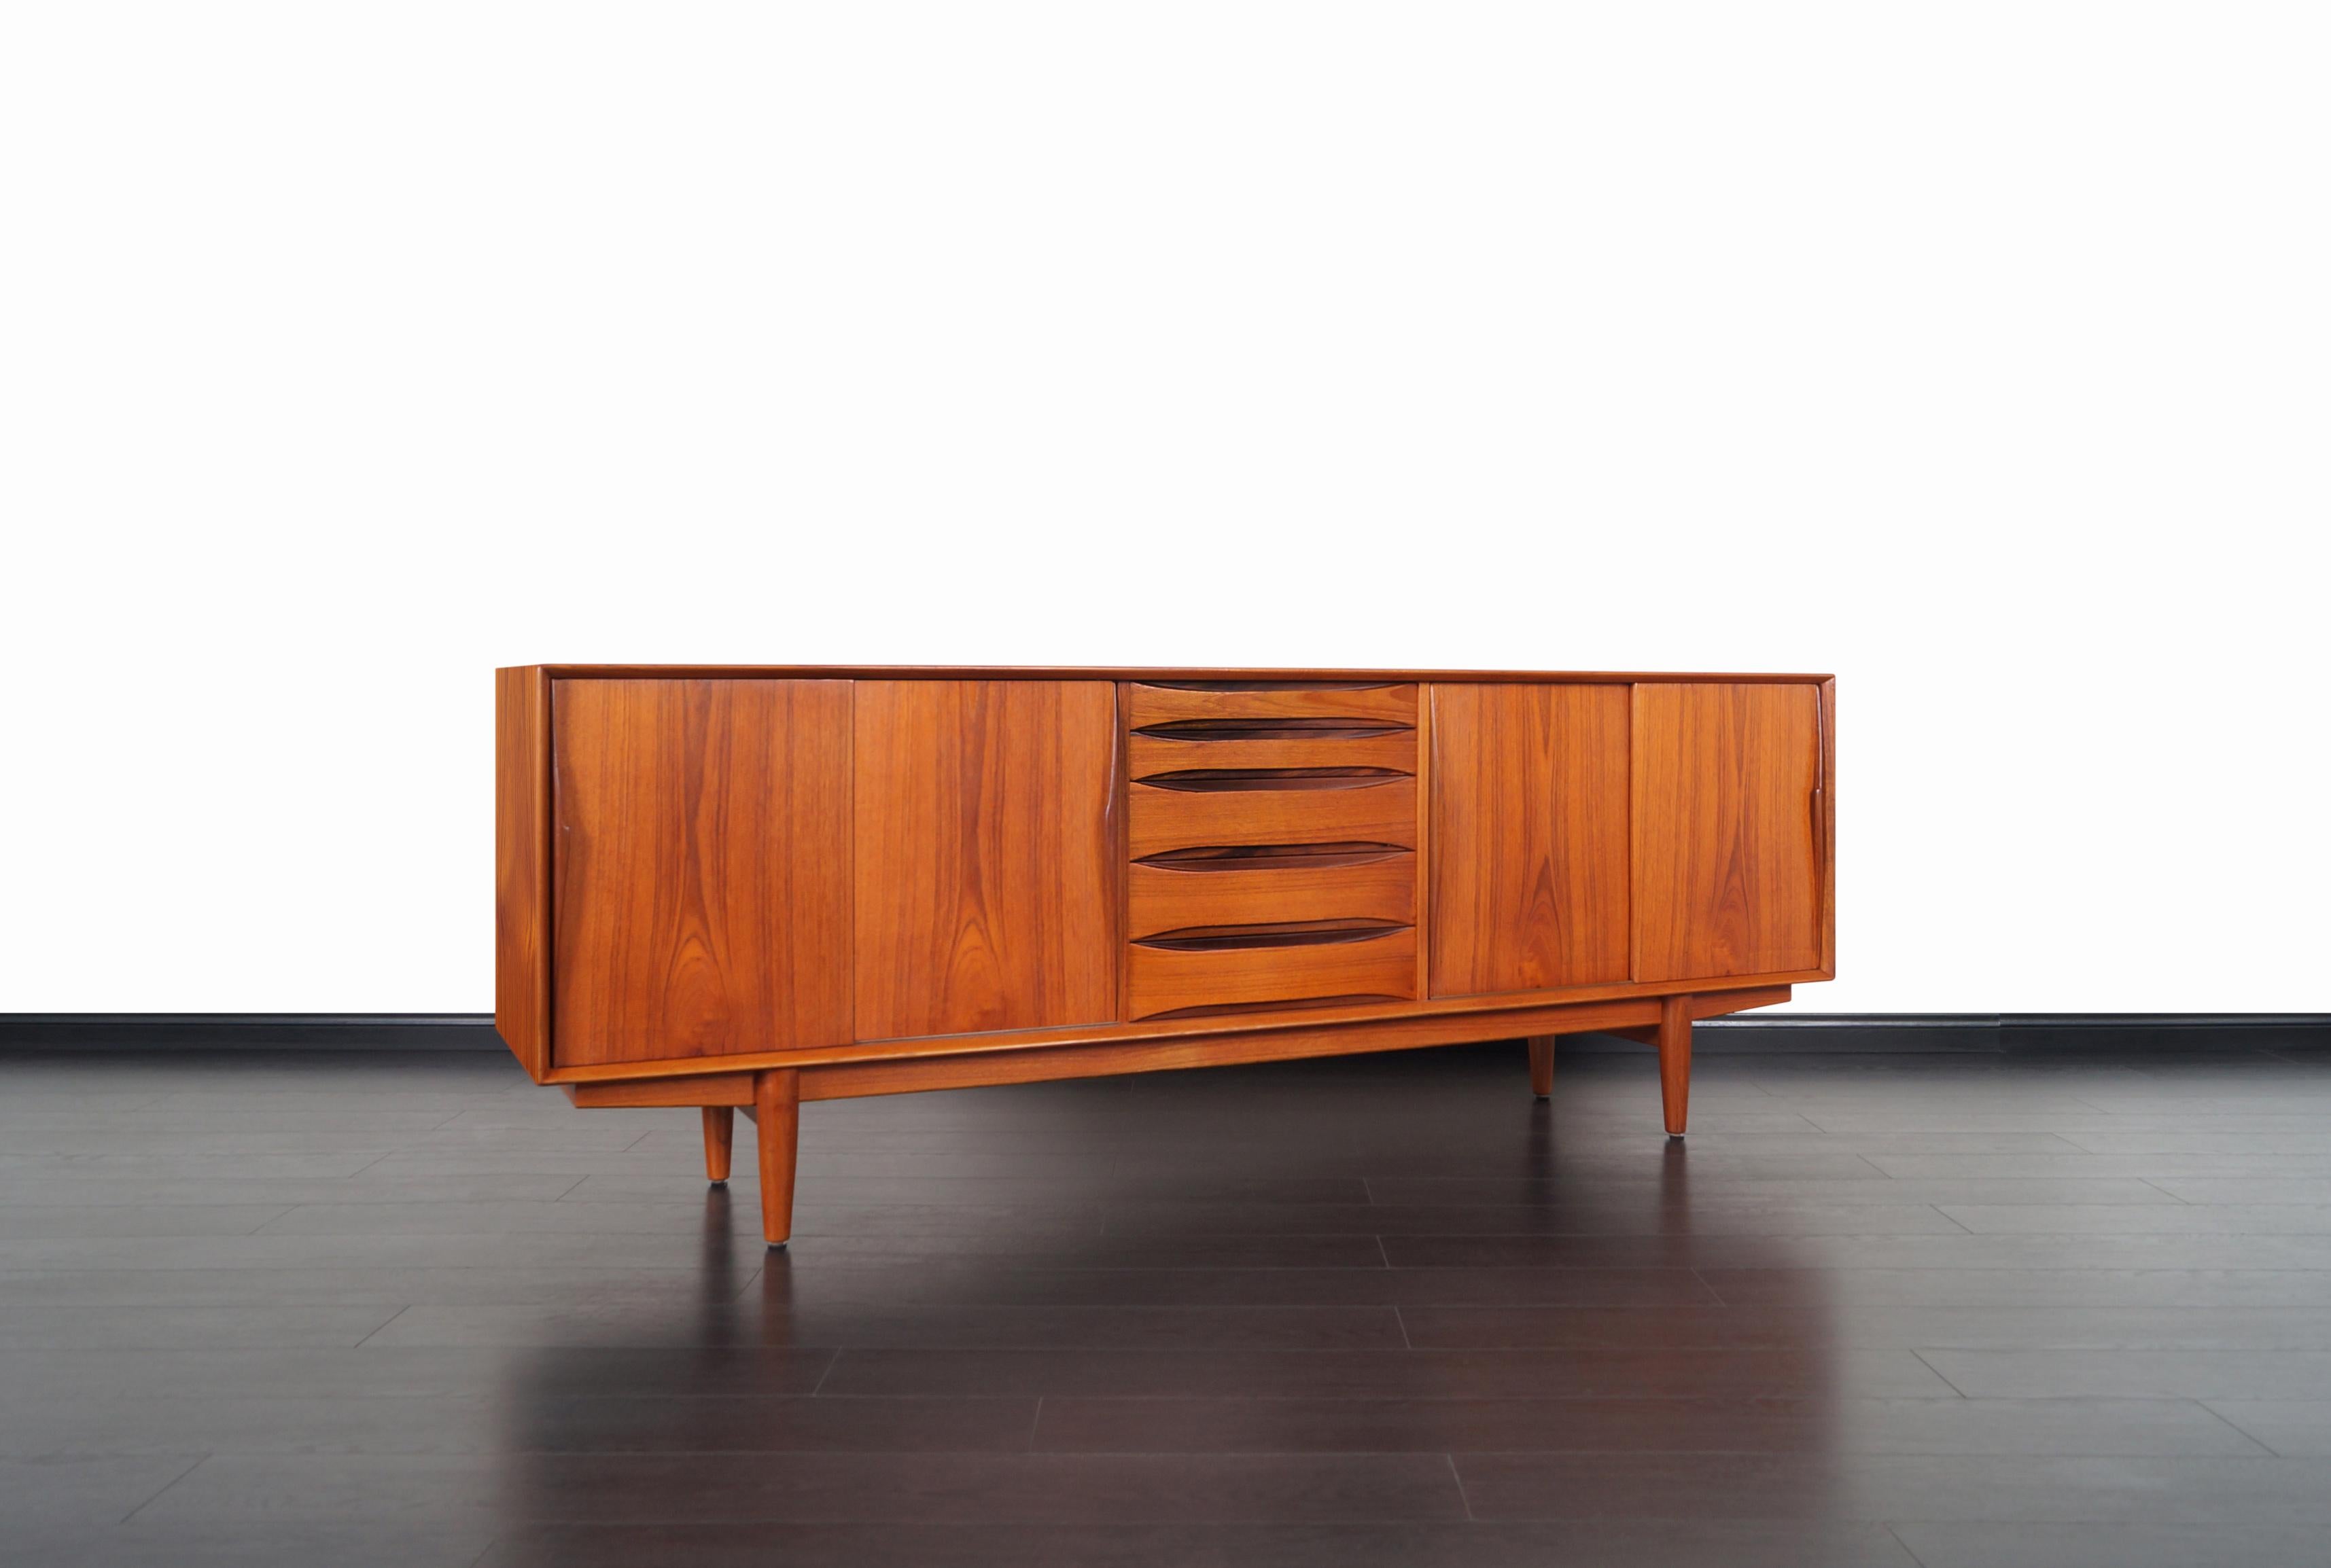 Exceptional Danish modern teak credenza designed by Henry Rosengren Hansen for Skovby Møbelfabrik in Denmark. This skillfully crafted credenza, also known as model #63, features four sliding doors with adjustable shelves and five dovetailed drawers